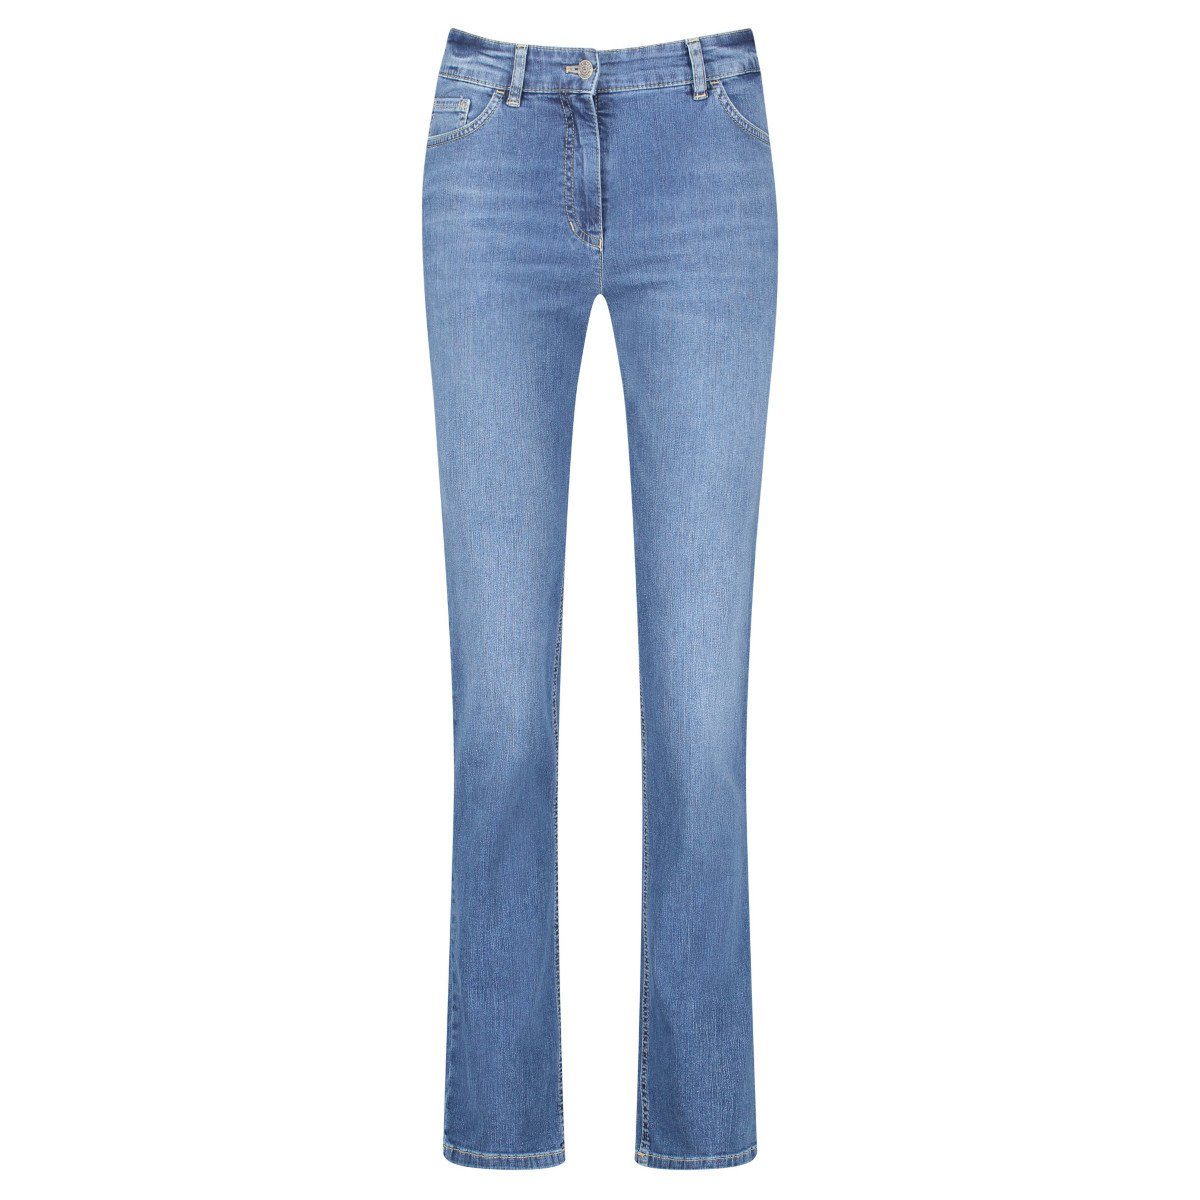 FIT Straight STRAIGHT 92307-67840 USE BLUE Romy GERRY MIT 873004 Fit WEBER DENIM 5-Pocket-Jeans